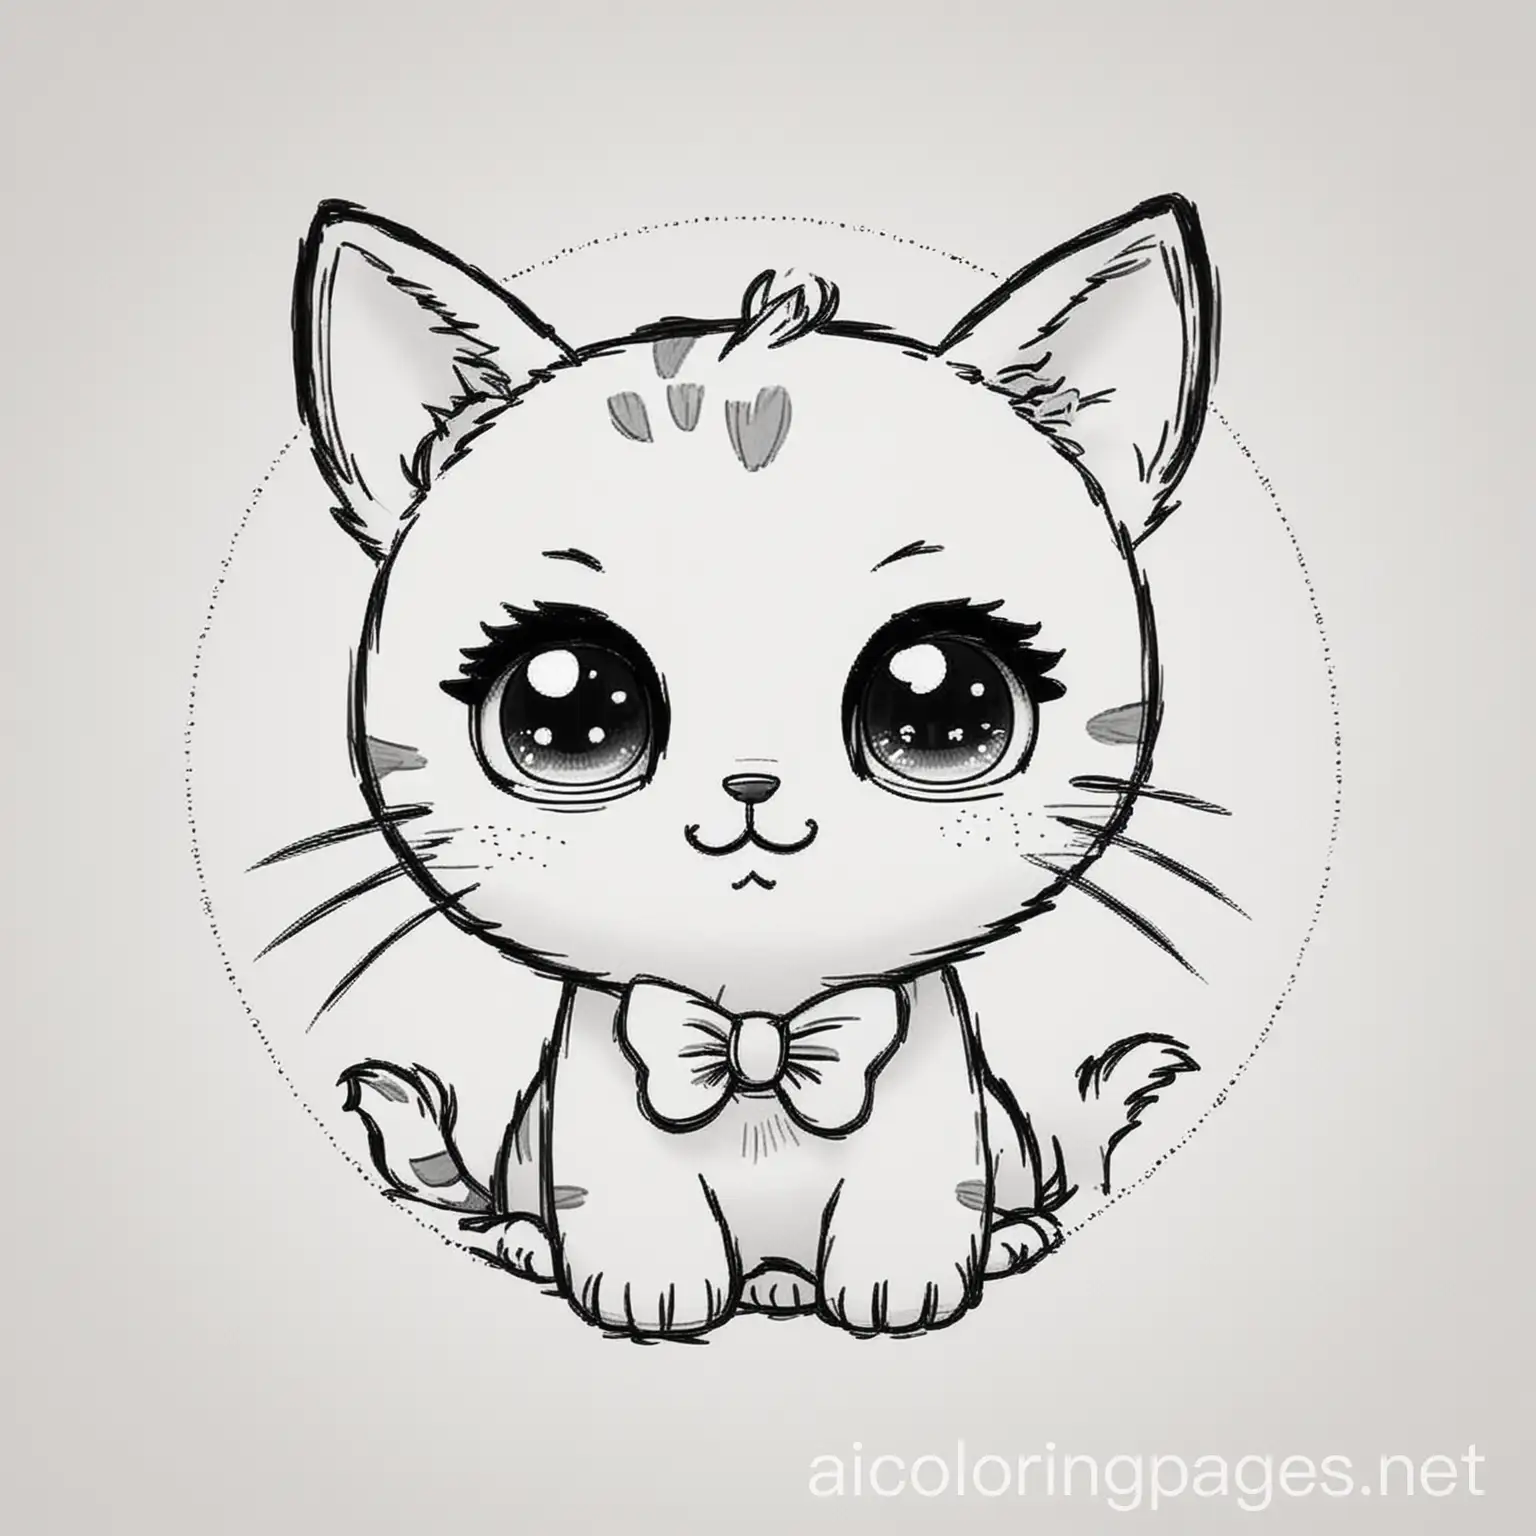 Cute-Kawaii-Cat-Coloring-Page-with-Bow-Simple-Black-and-White-Line-Art-for-Kids